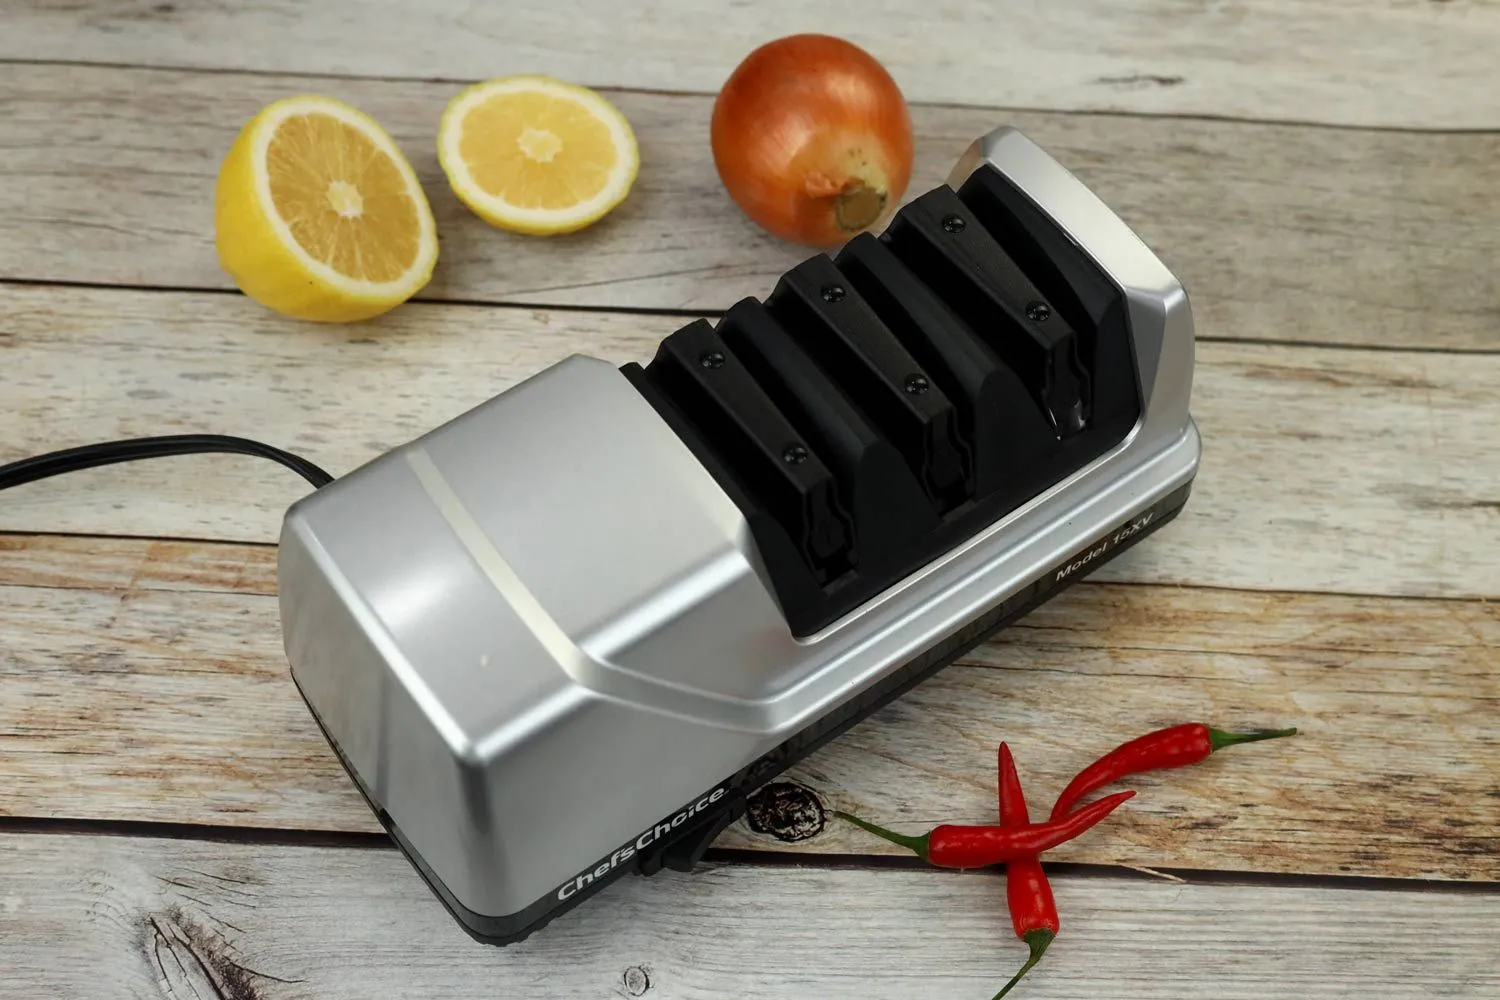 https://cdn.healthykitchen101.com/reviews/images/knife-sharpeners/clbkieb8o00199t884dh45ycl.jpg